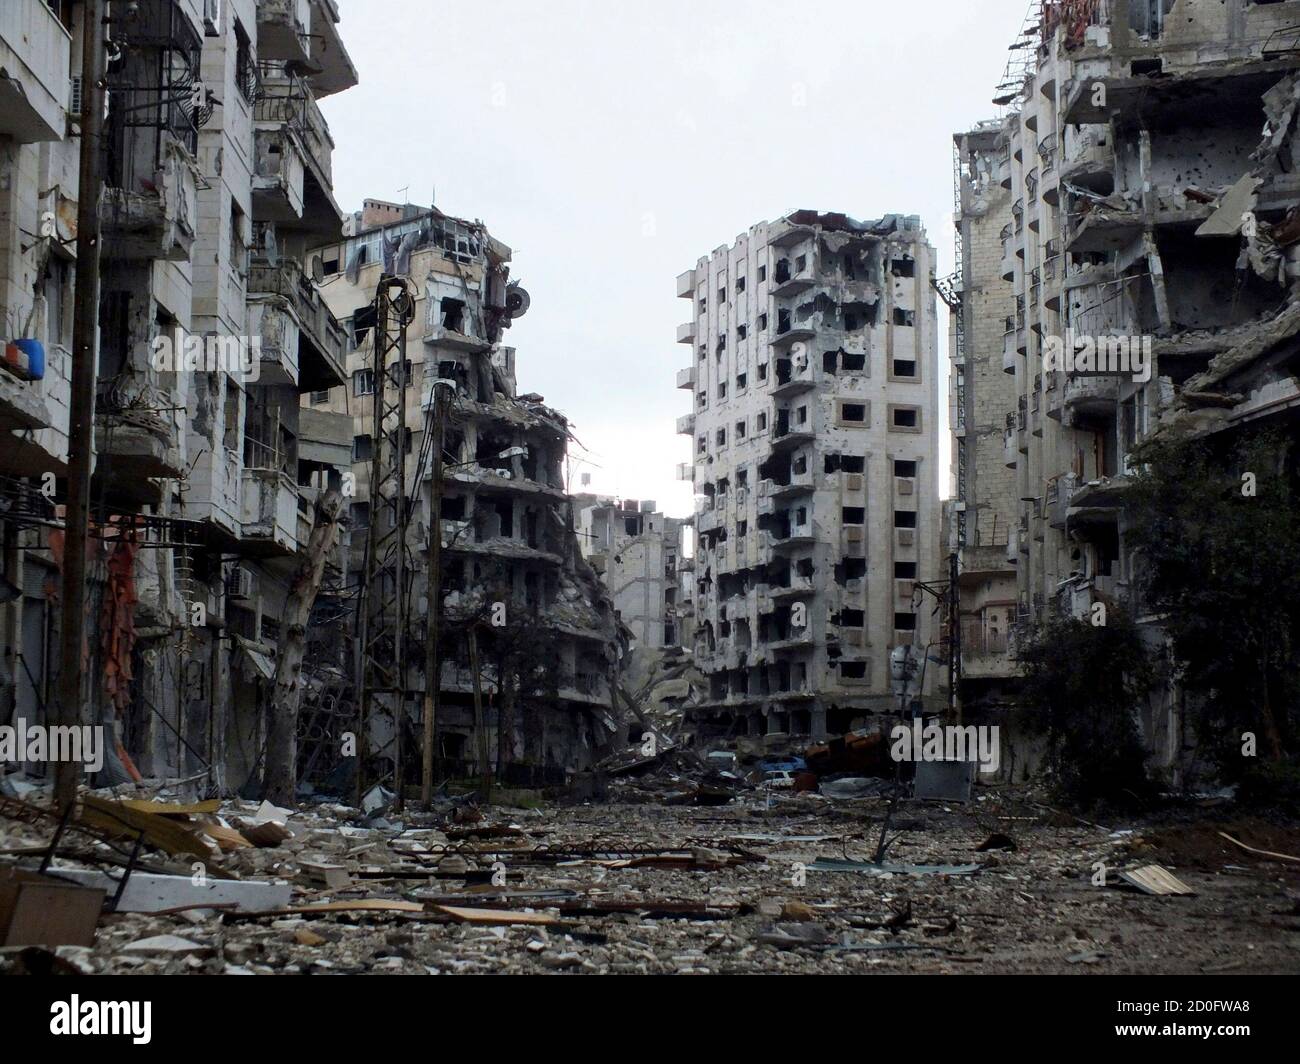 A general view of damaged buildings in Jouret al-Shayah, Homs February 2, 2013. Picture taken on February 2, 2013. REUTERS/Yazen Homsy (SYRIA - Tags: CONFLICT POLITICS CIVIL UNREST)  BEST QUALITY AVAILABLE Stock Photo